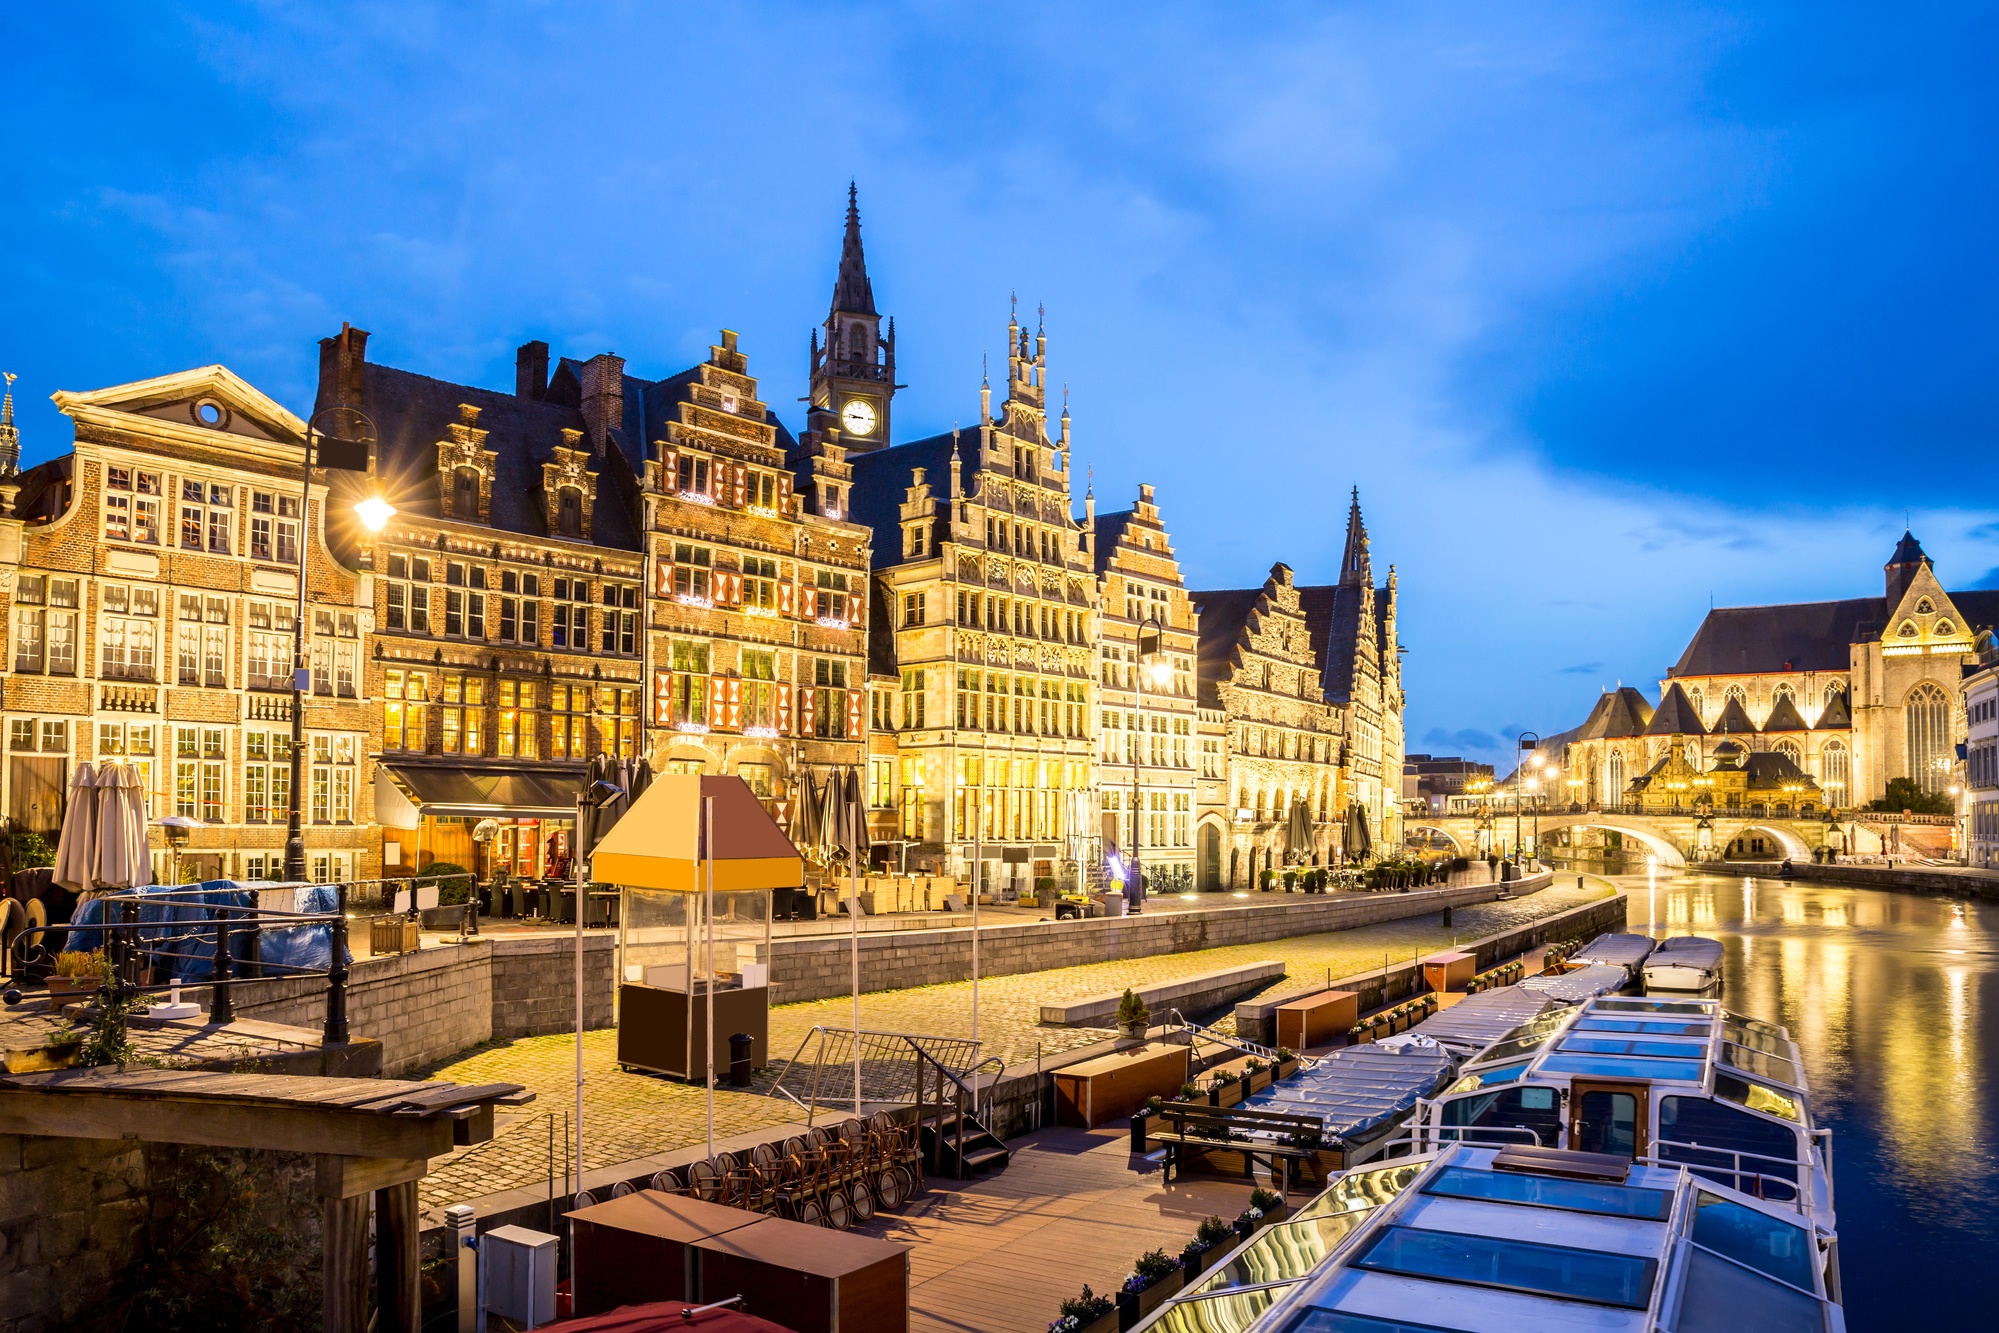 The beautiful city of Ghent, all lit up at night